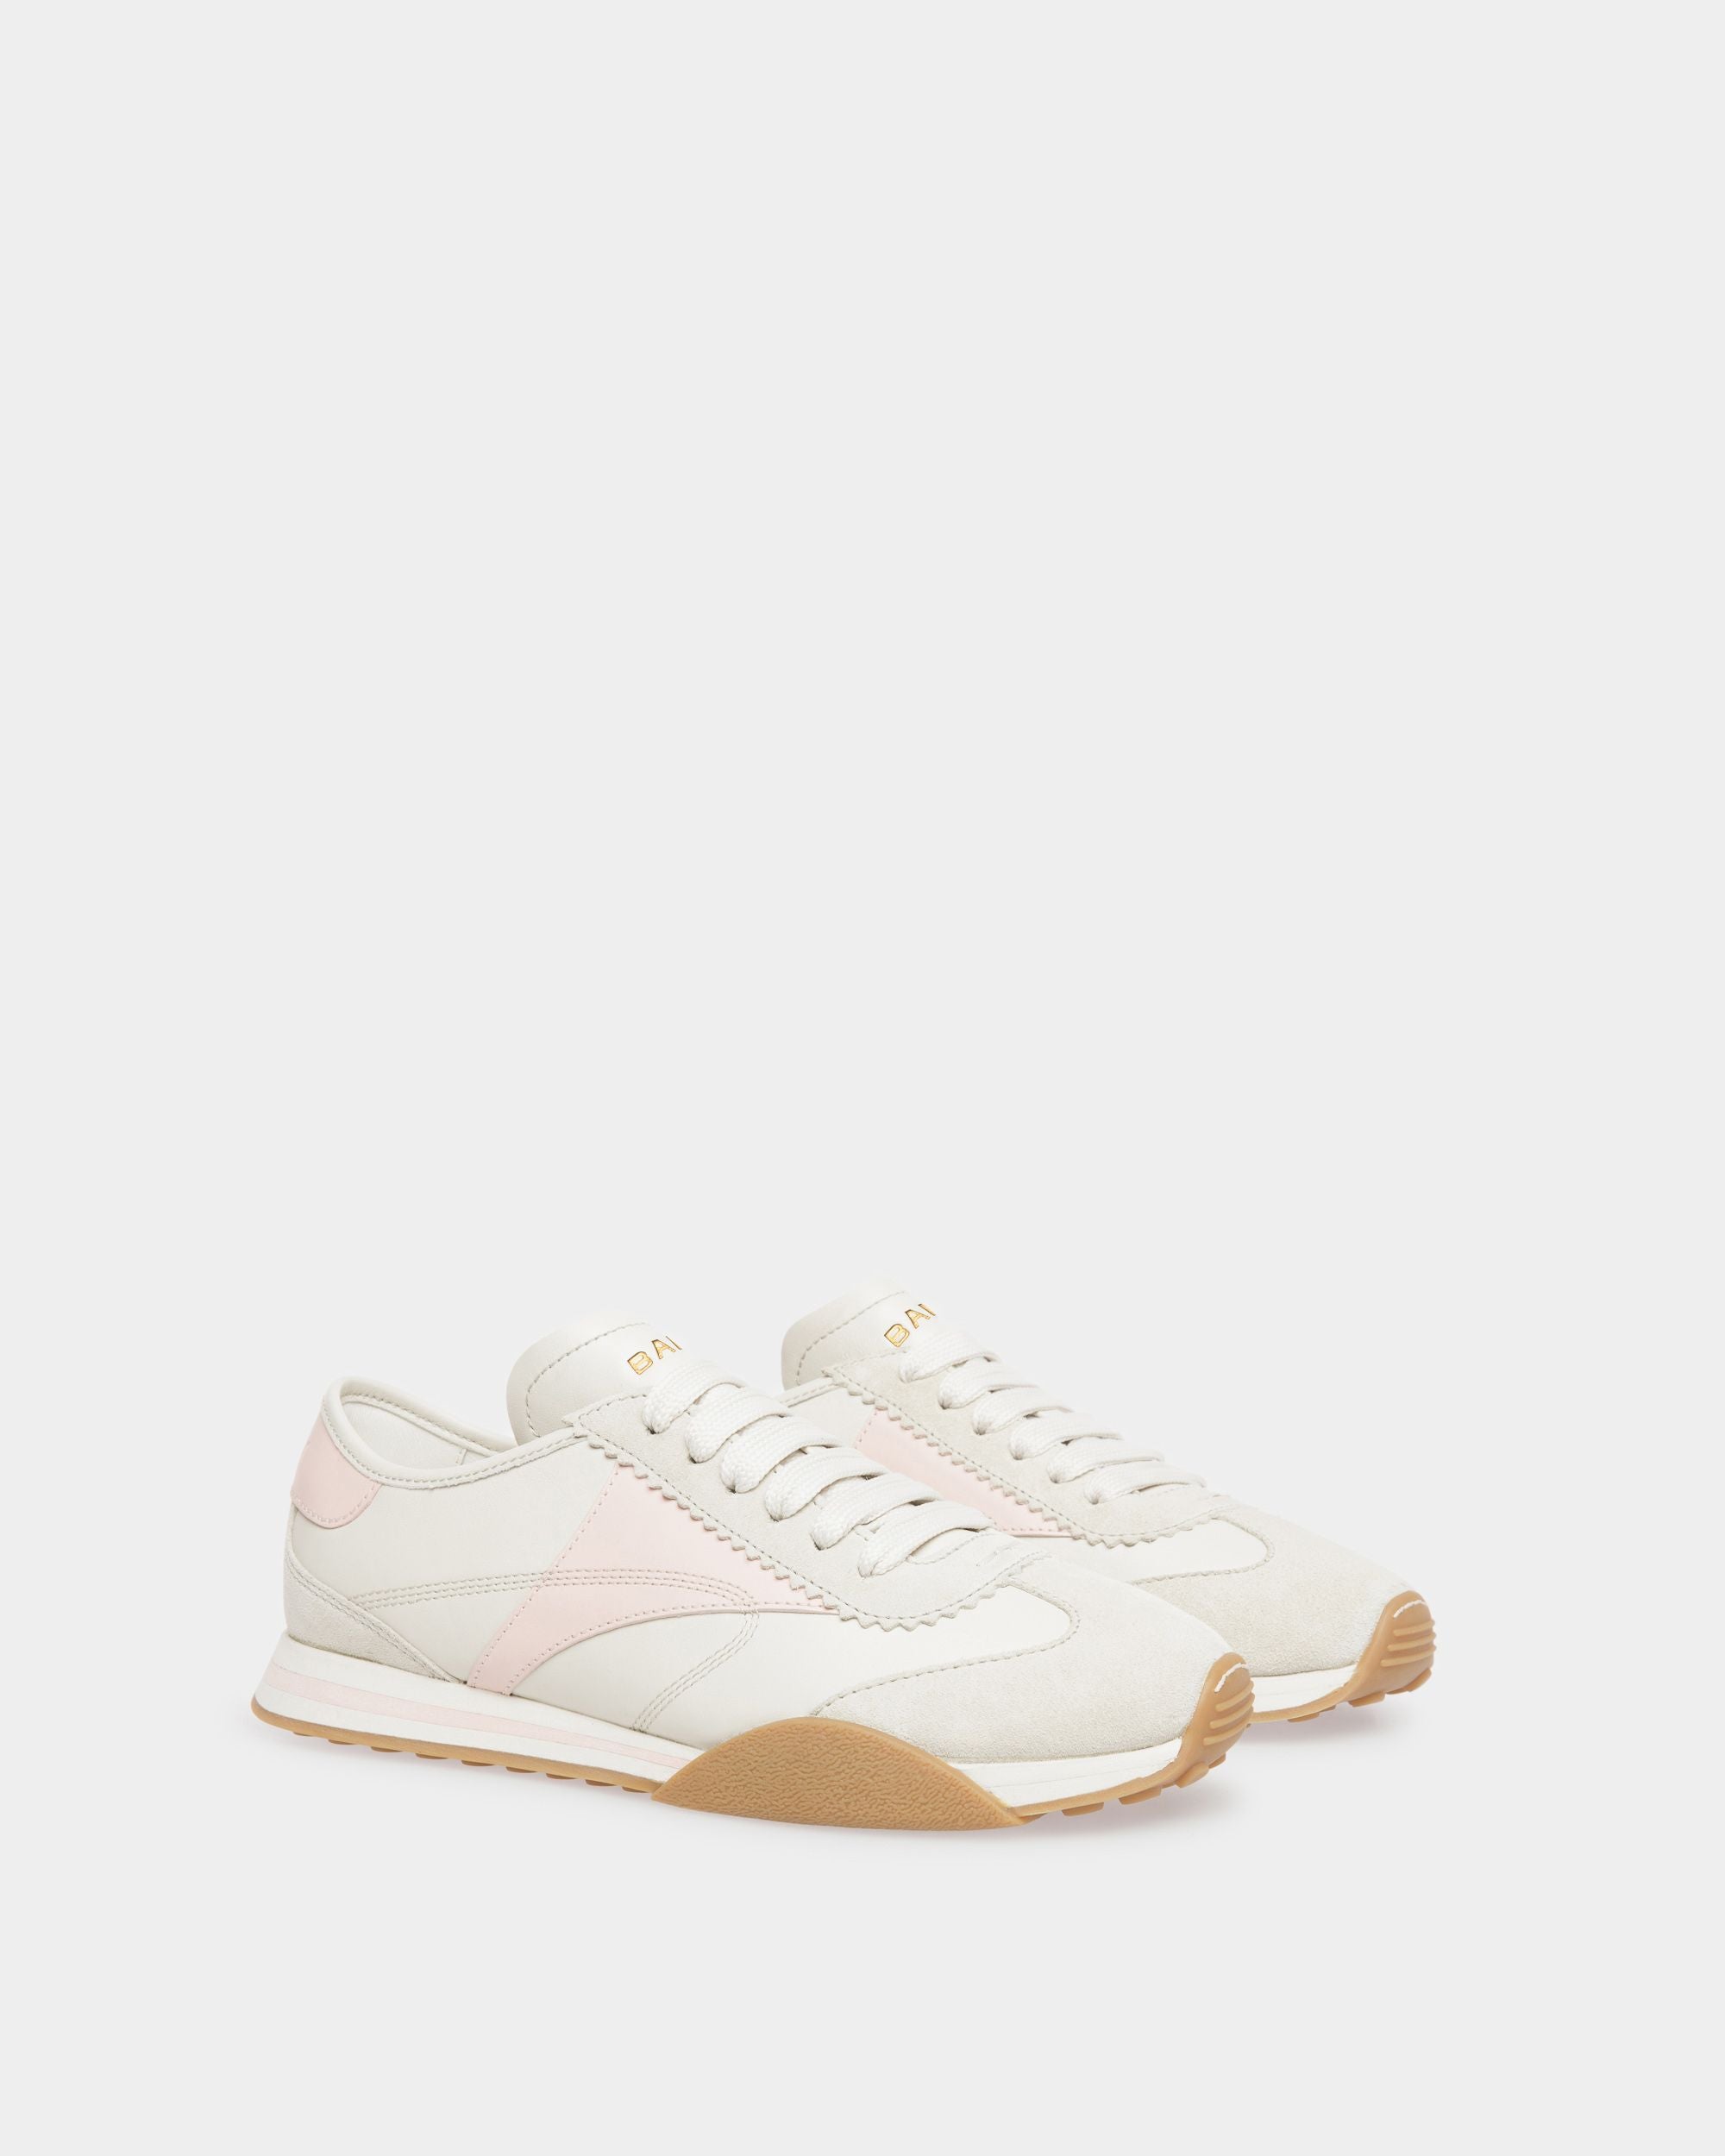 Sonney | Women's Sneakers | Dusty White And Rose Leather | Bally | Still Life 3/4 Front